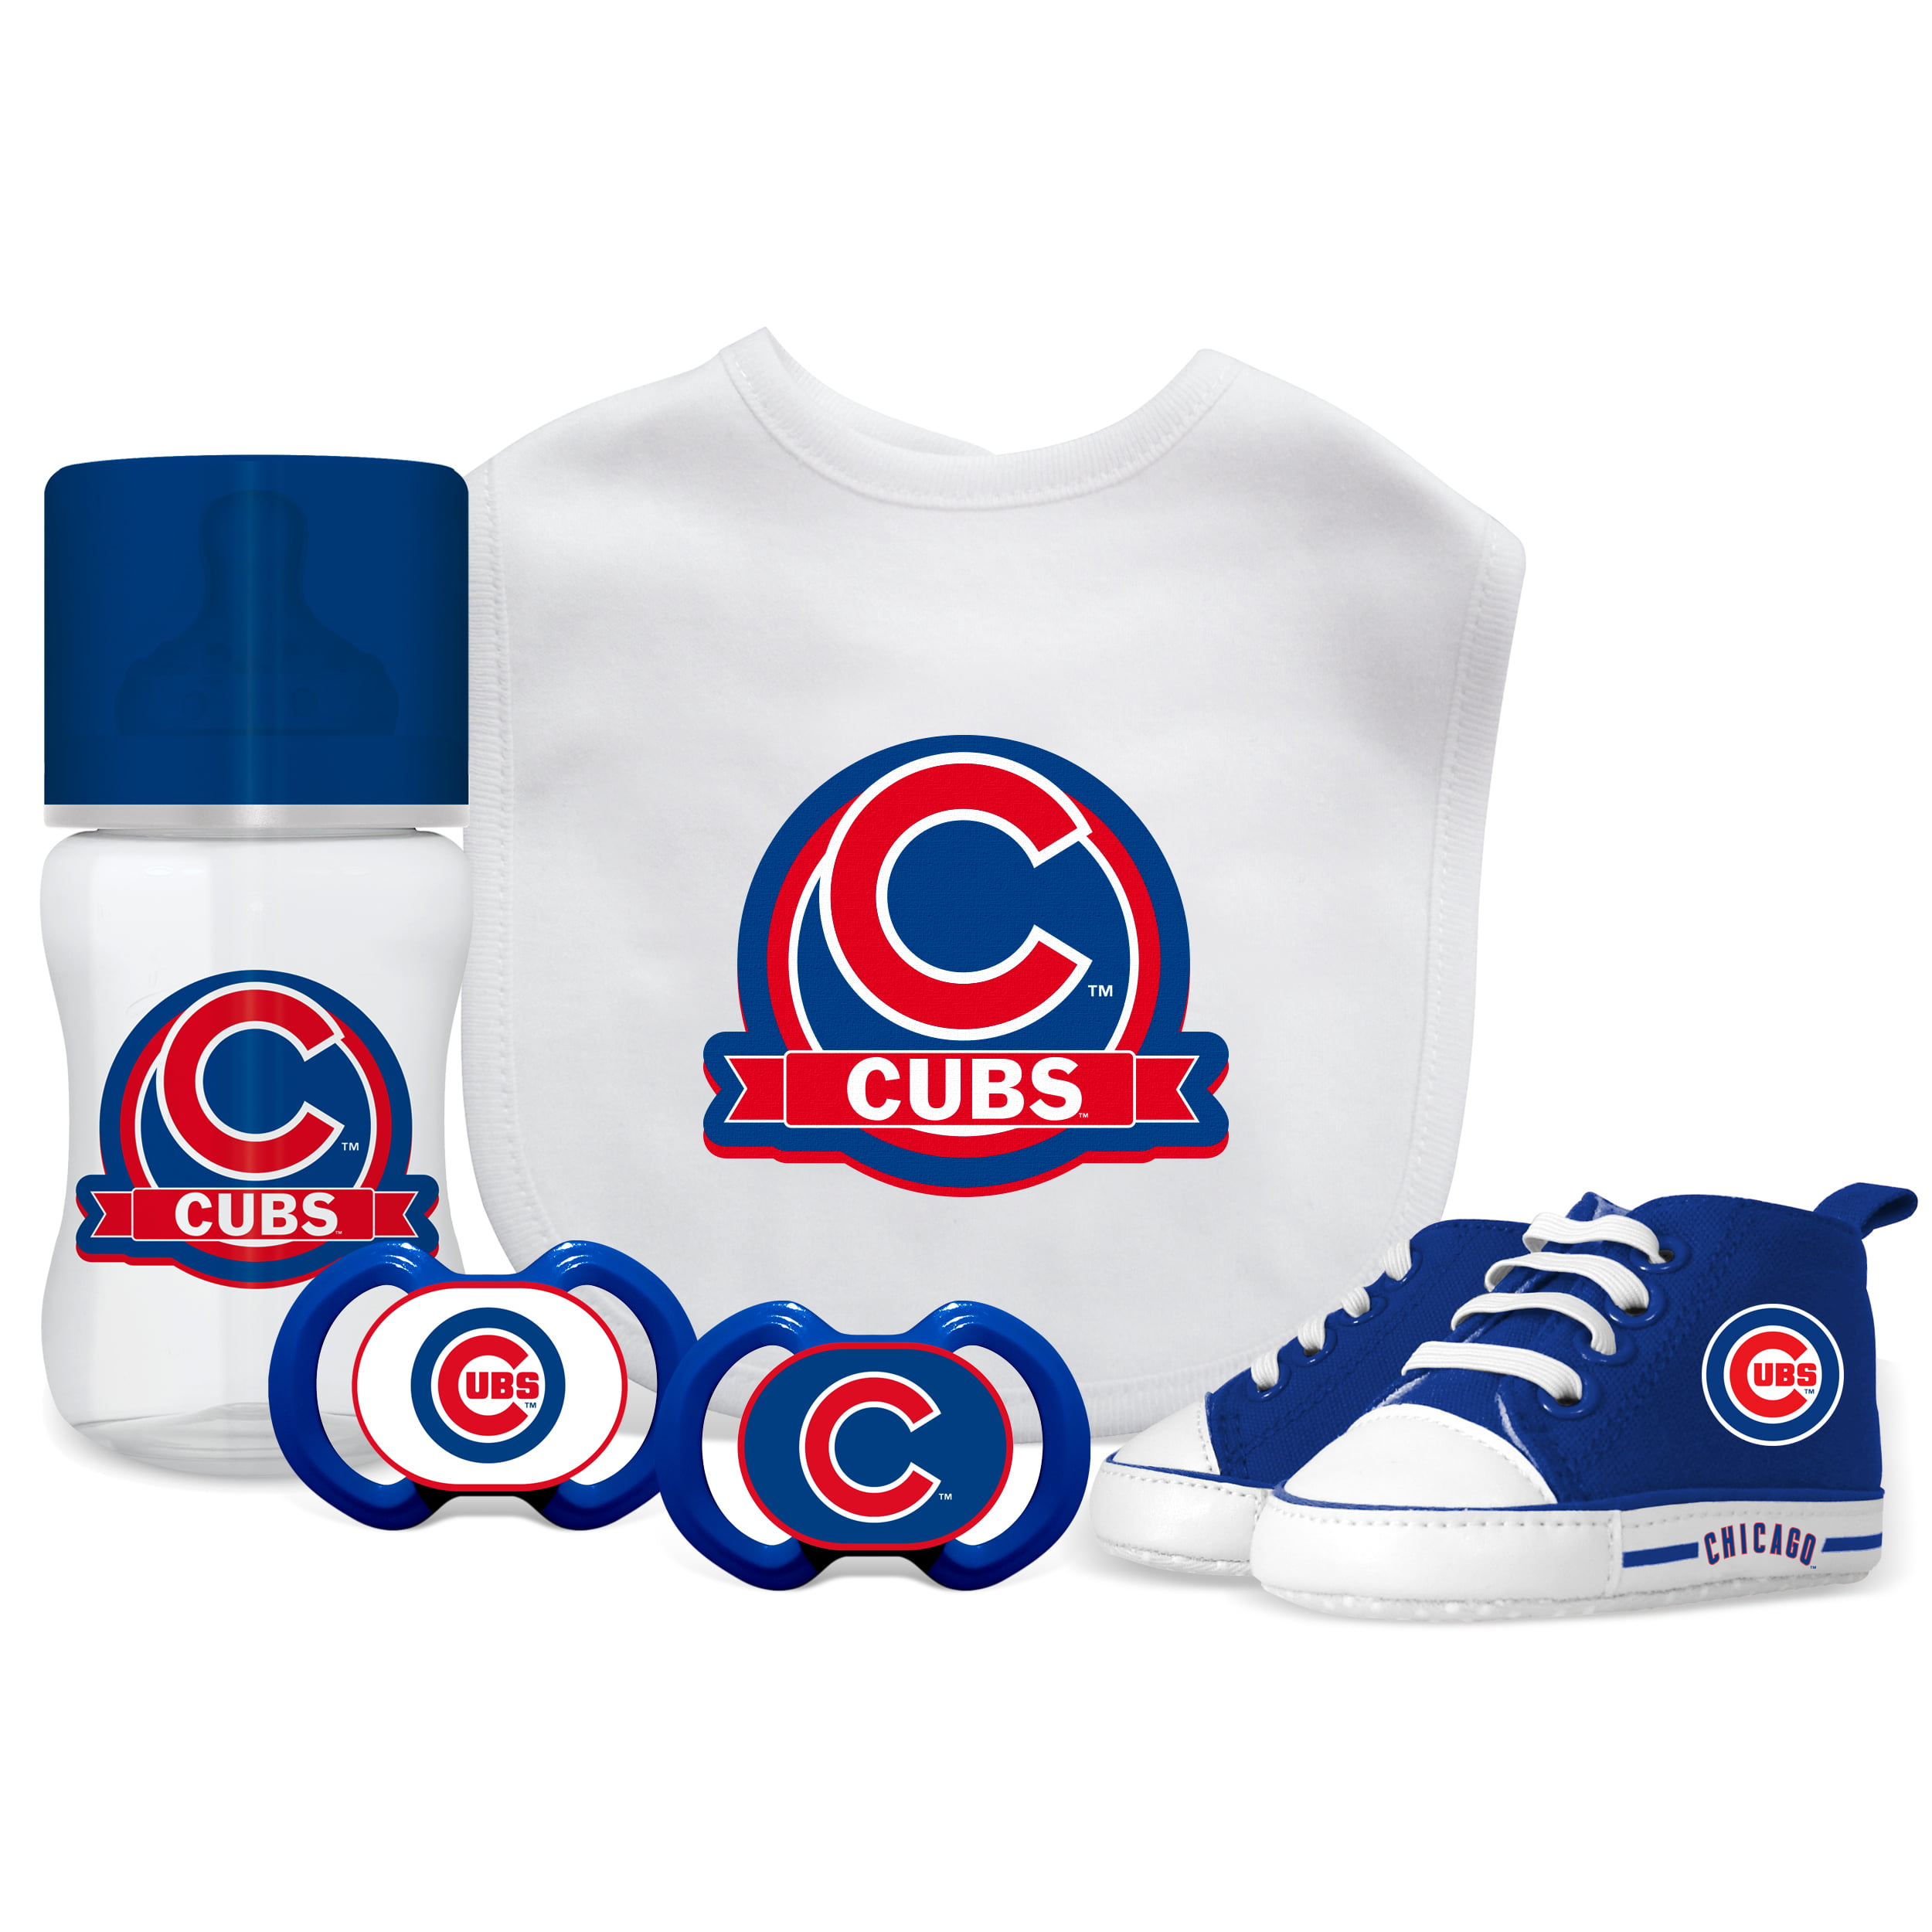 MLB Chicago Cubs 5-Piece Baby Gift Set 